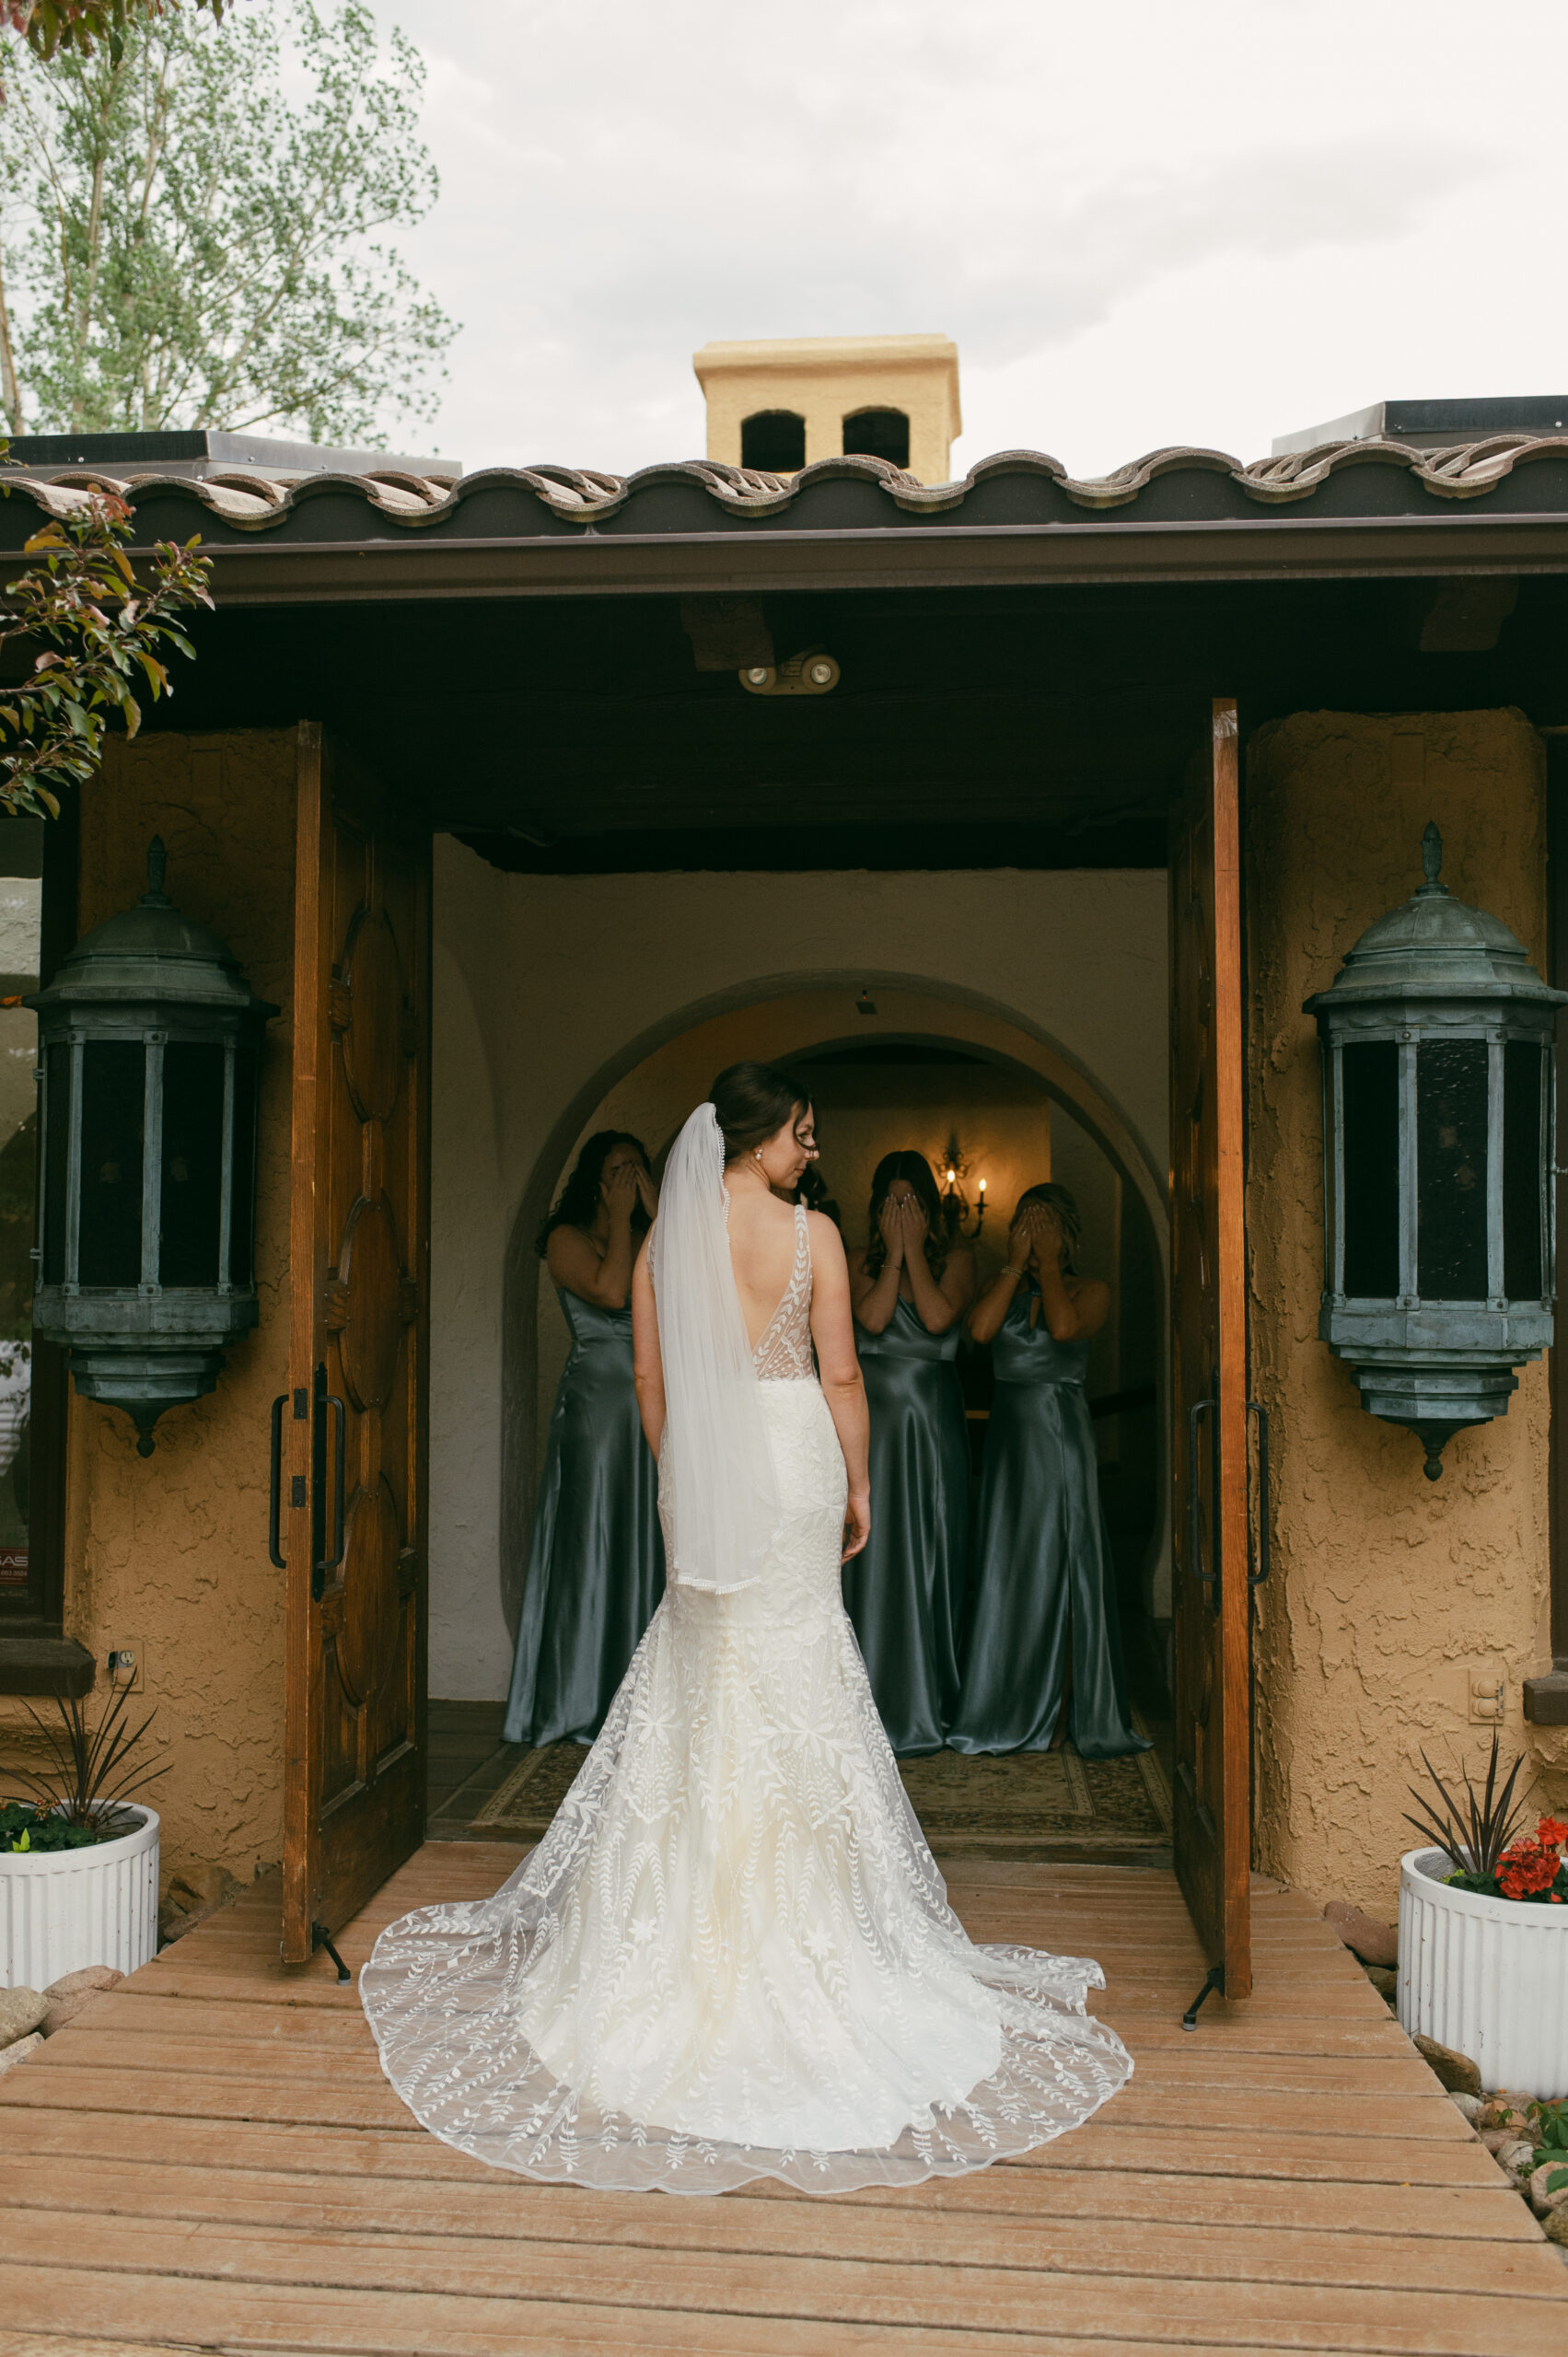 The first look between a bride and her bridesmaids in the front intricate doors of Villa Parker in Colorado.